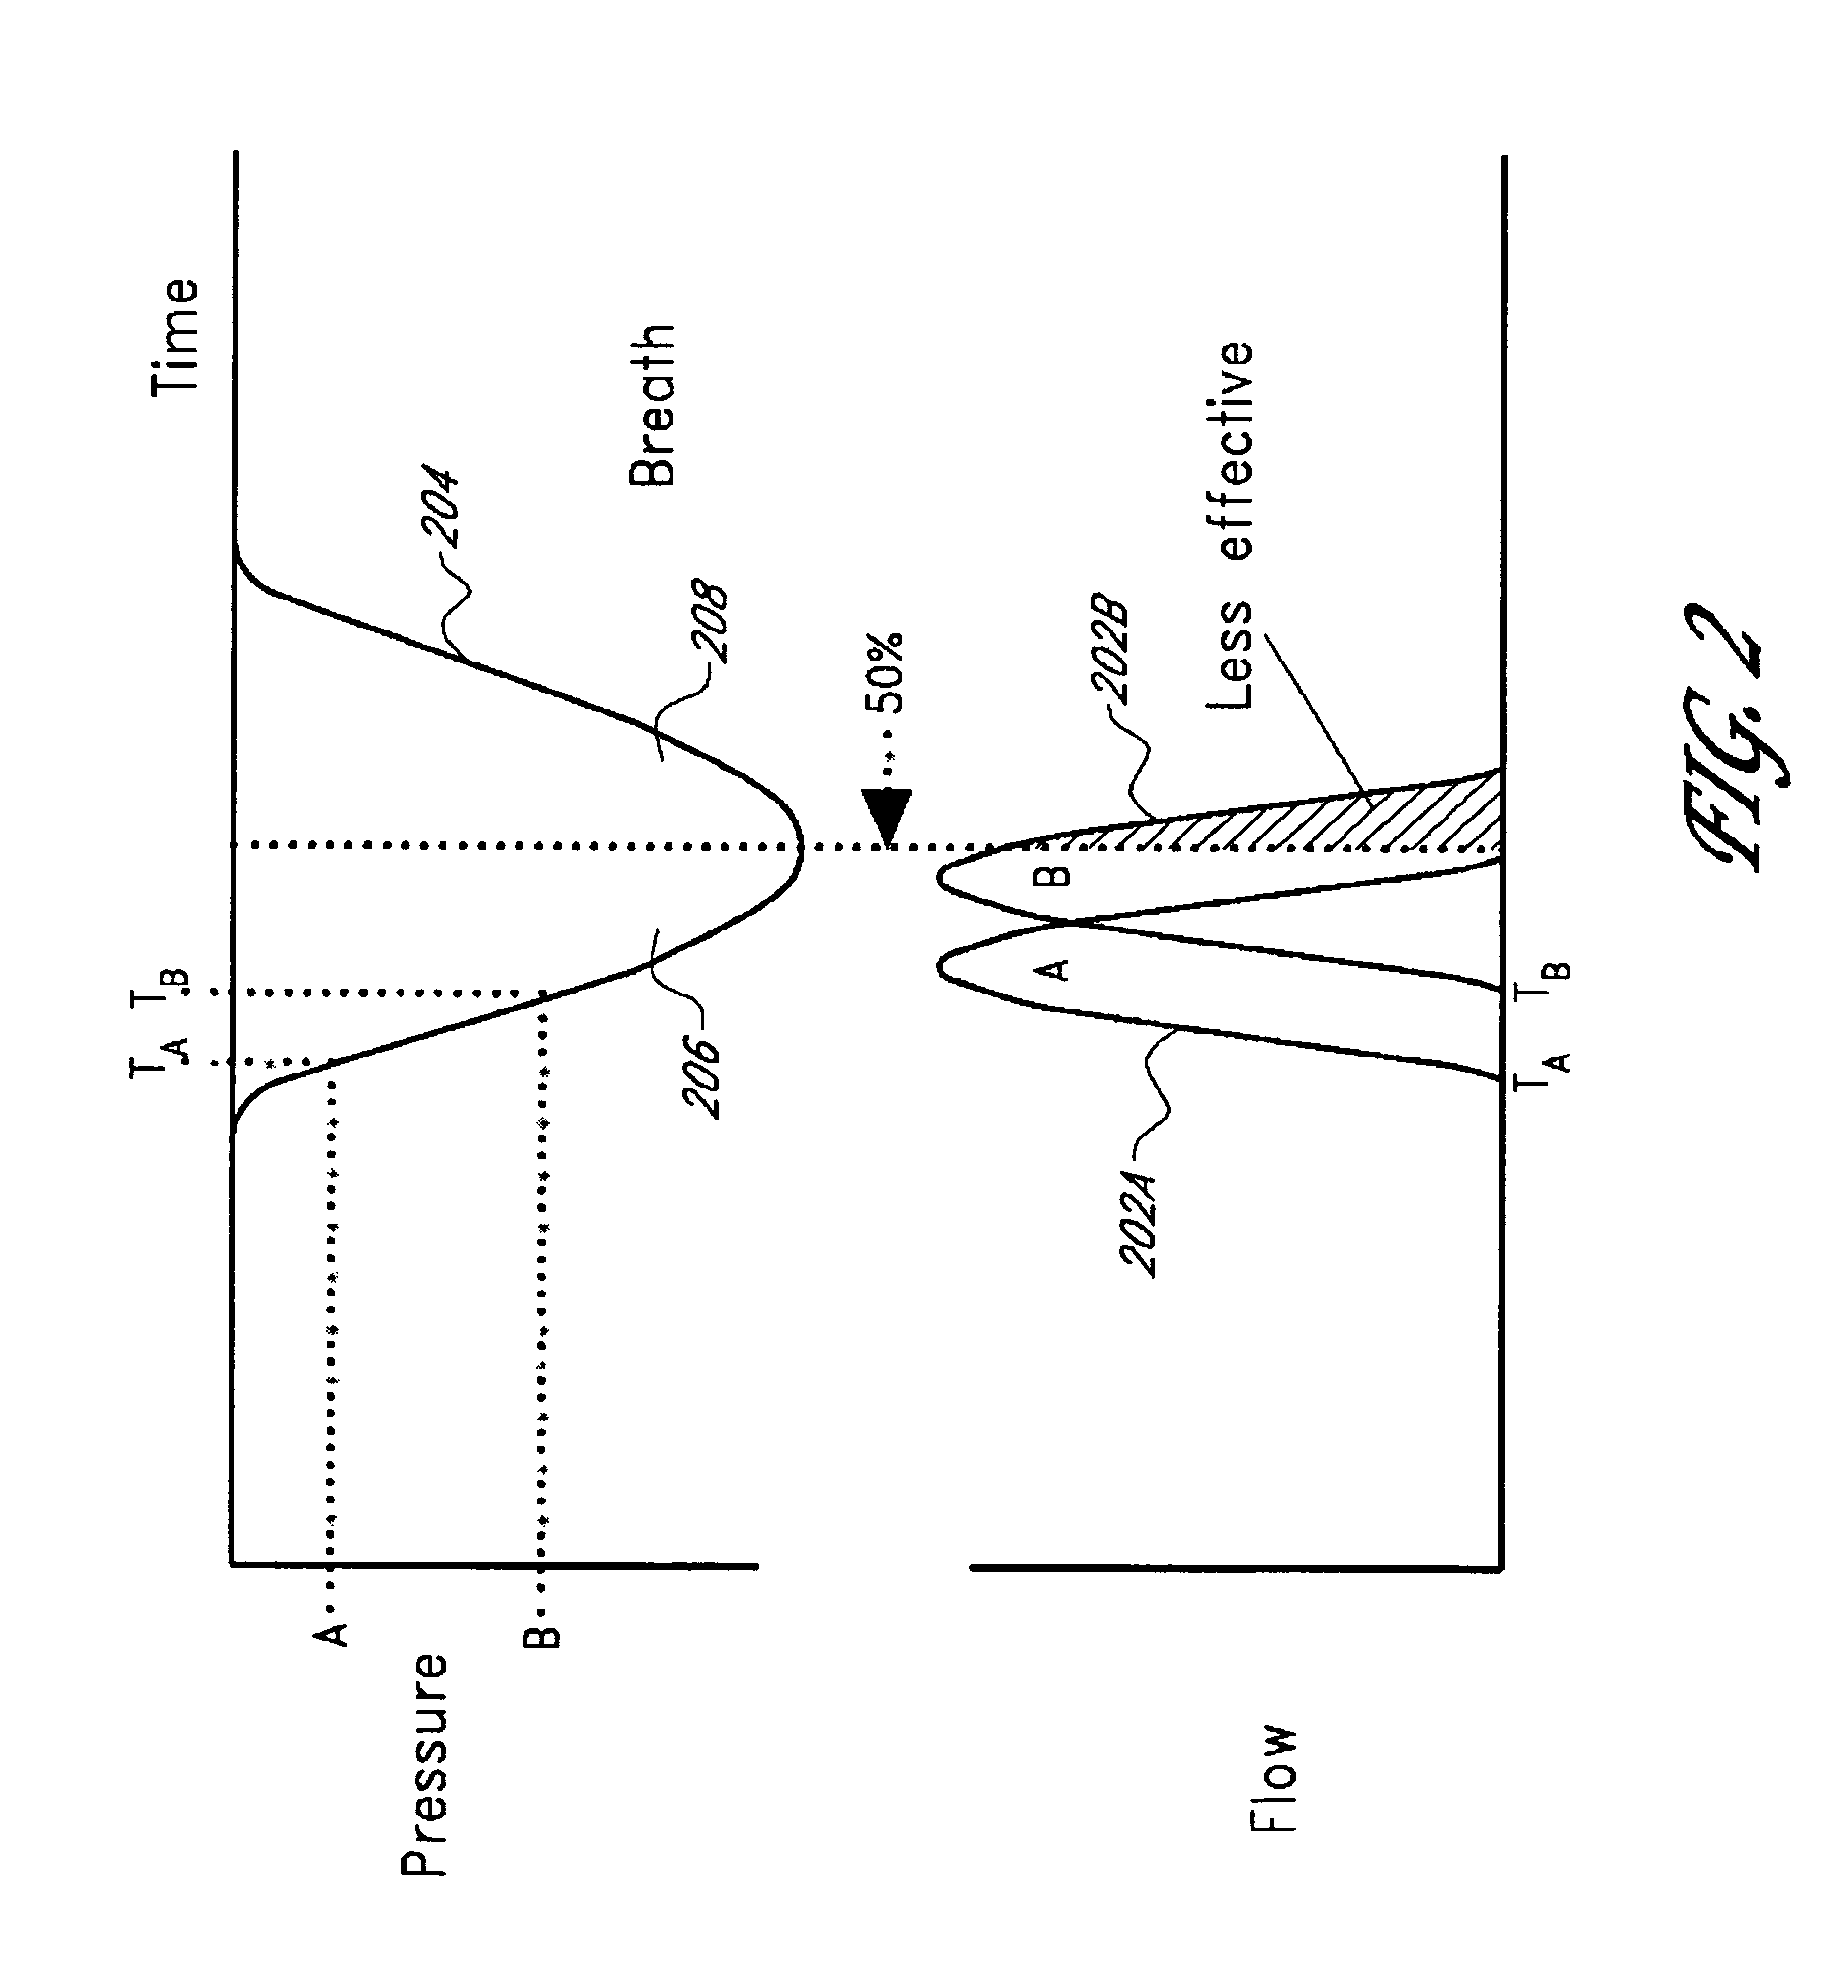 Systems and methods for delivering therapeutic gas to patients